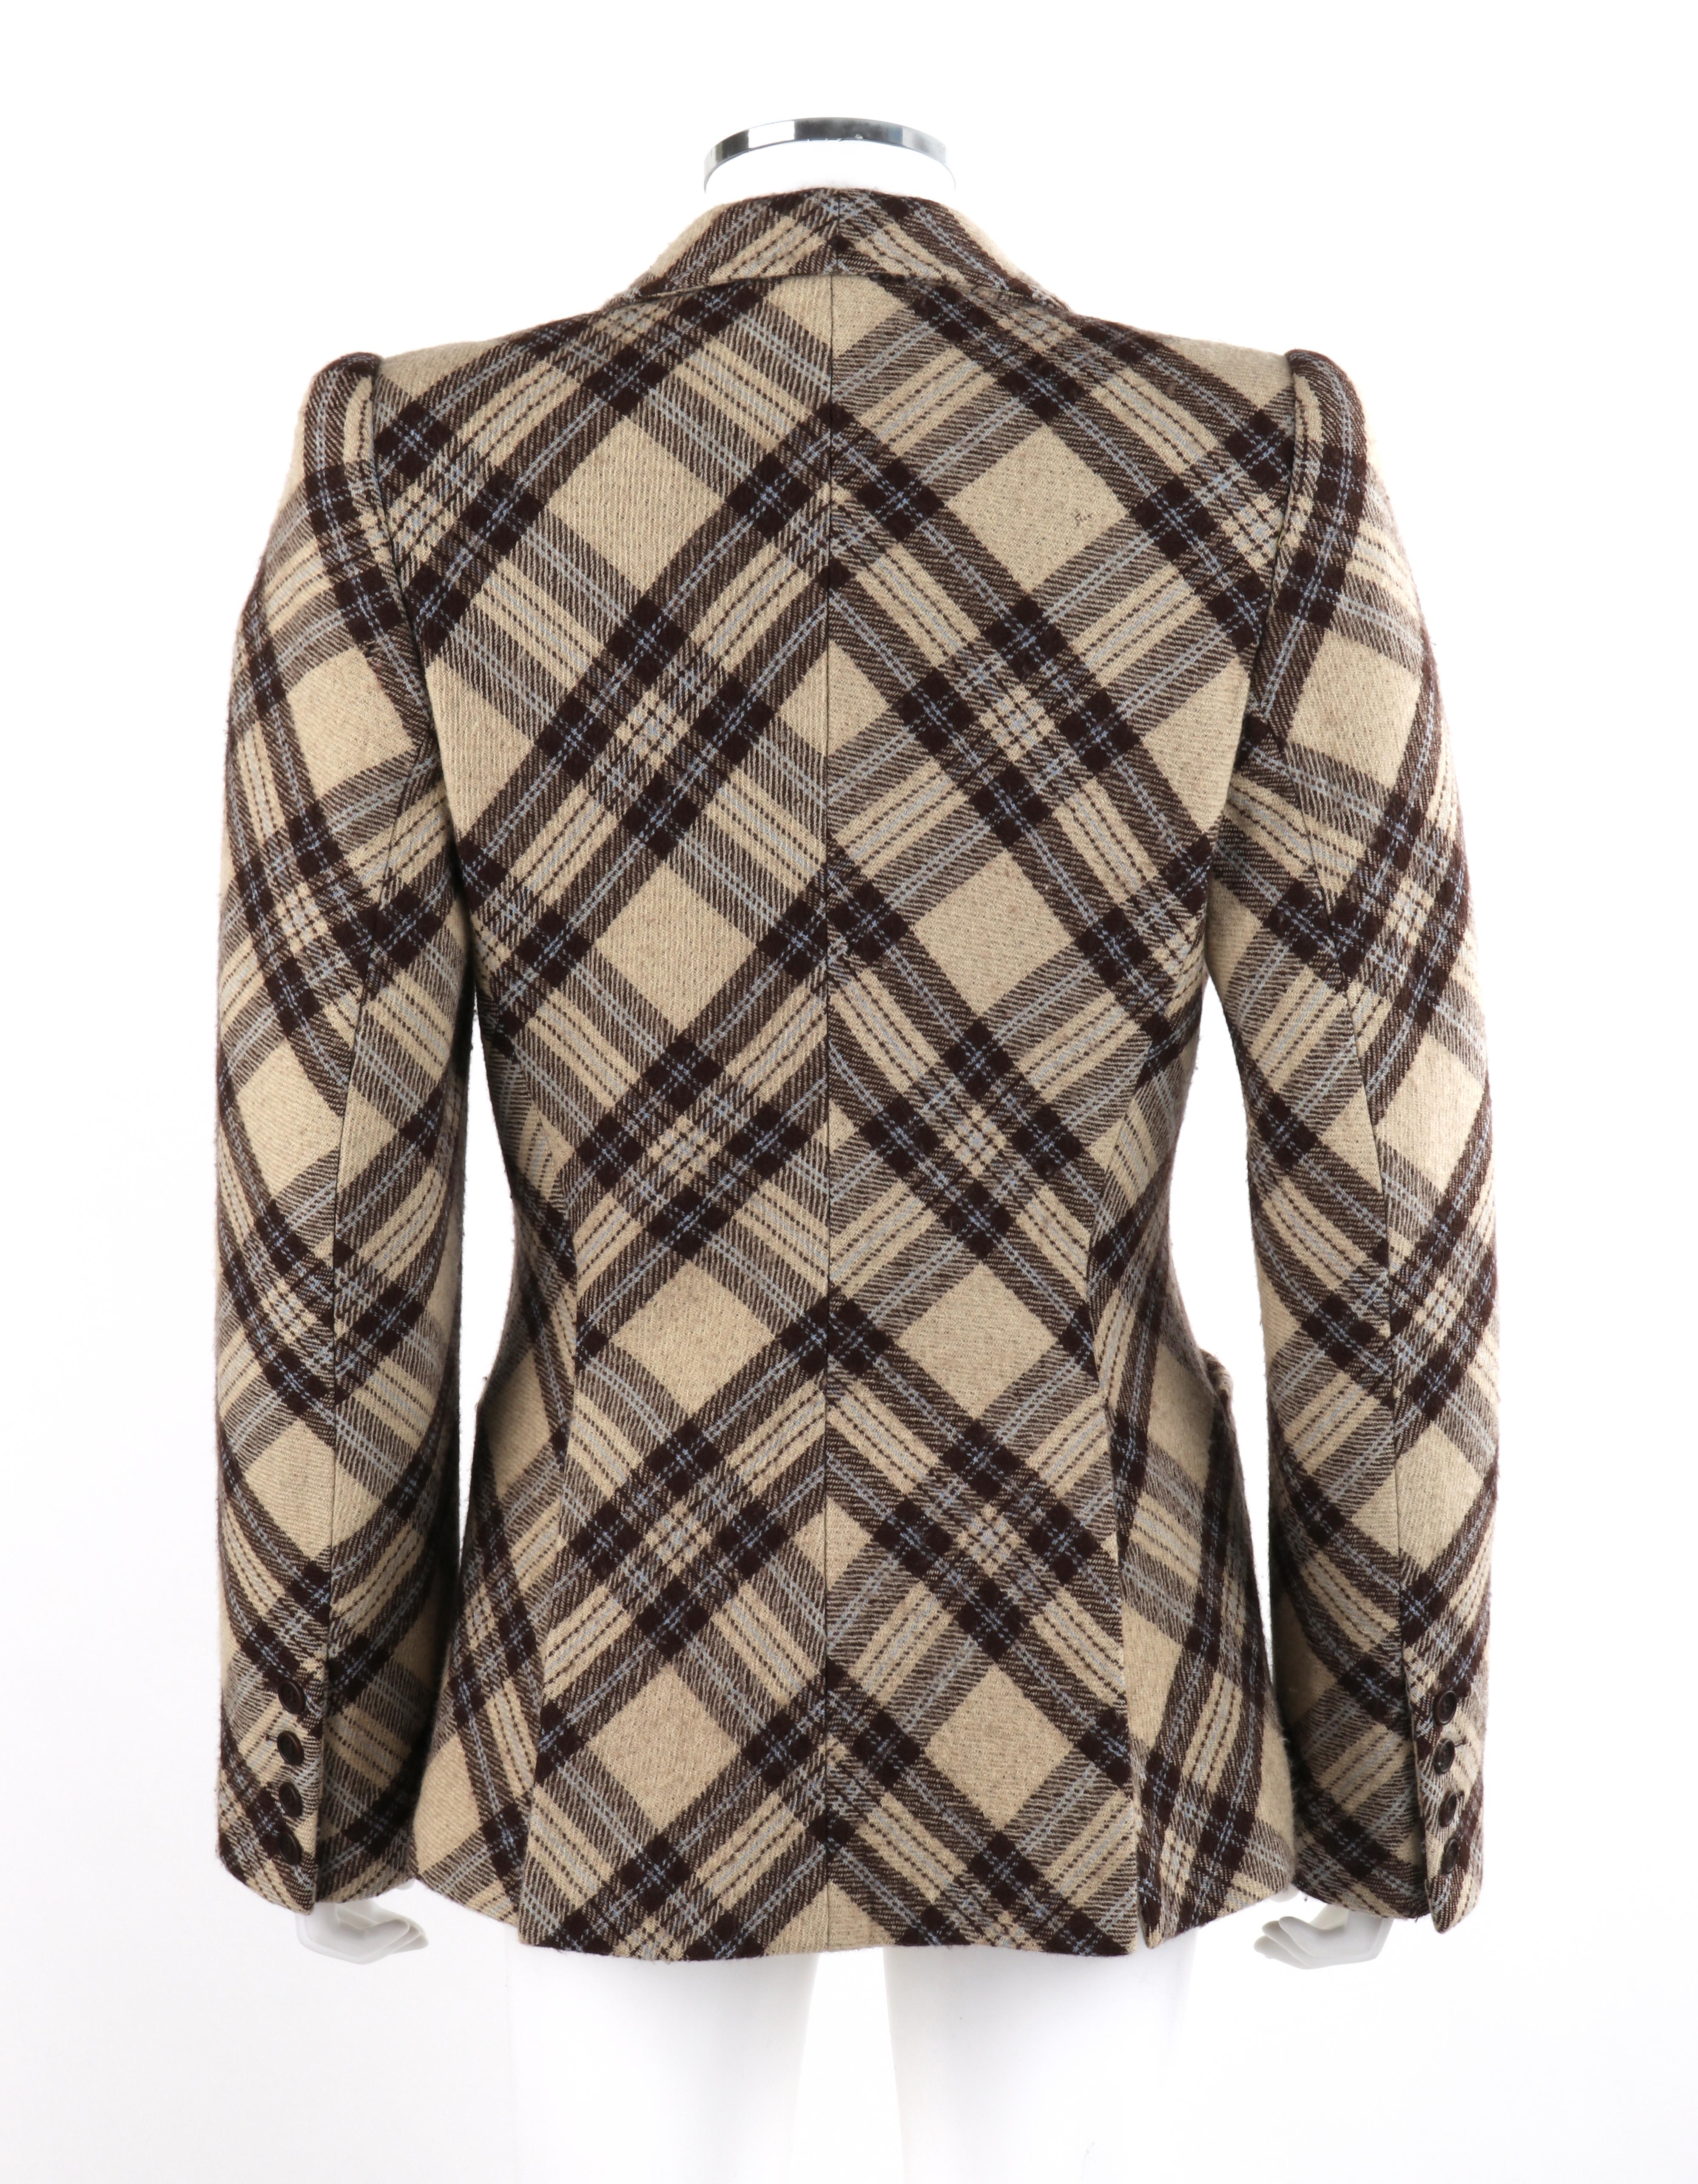 ALEXANDER McQUEEN F/W 2000 “Eshu” Tan Brown Blue Check Plaid Print Blazer Jacket In Good Condition For Sale In Thiensville, WI